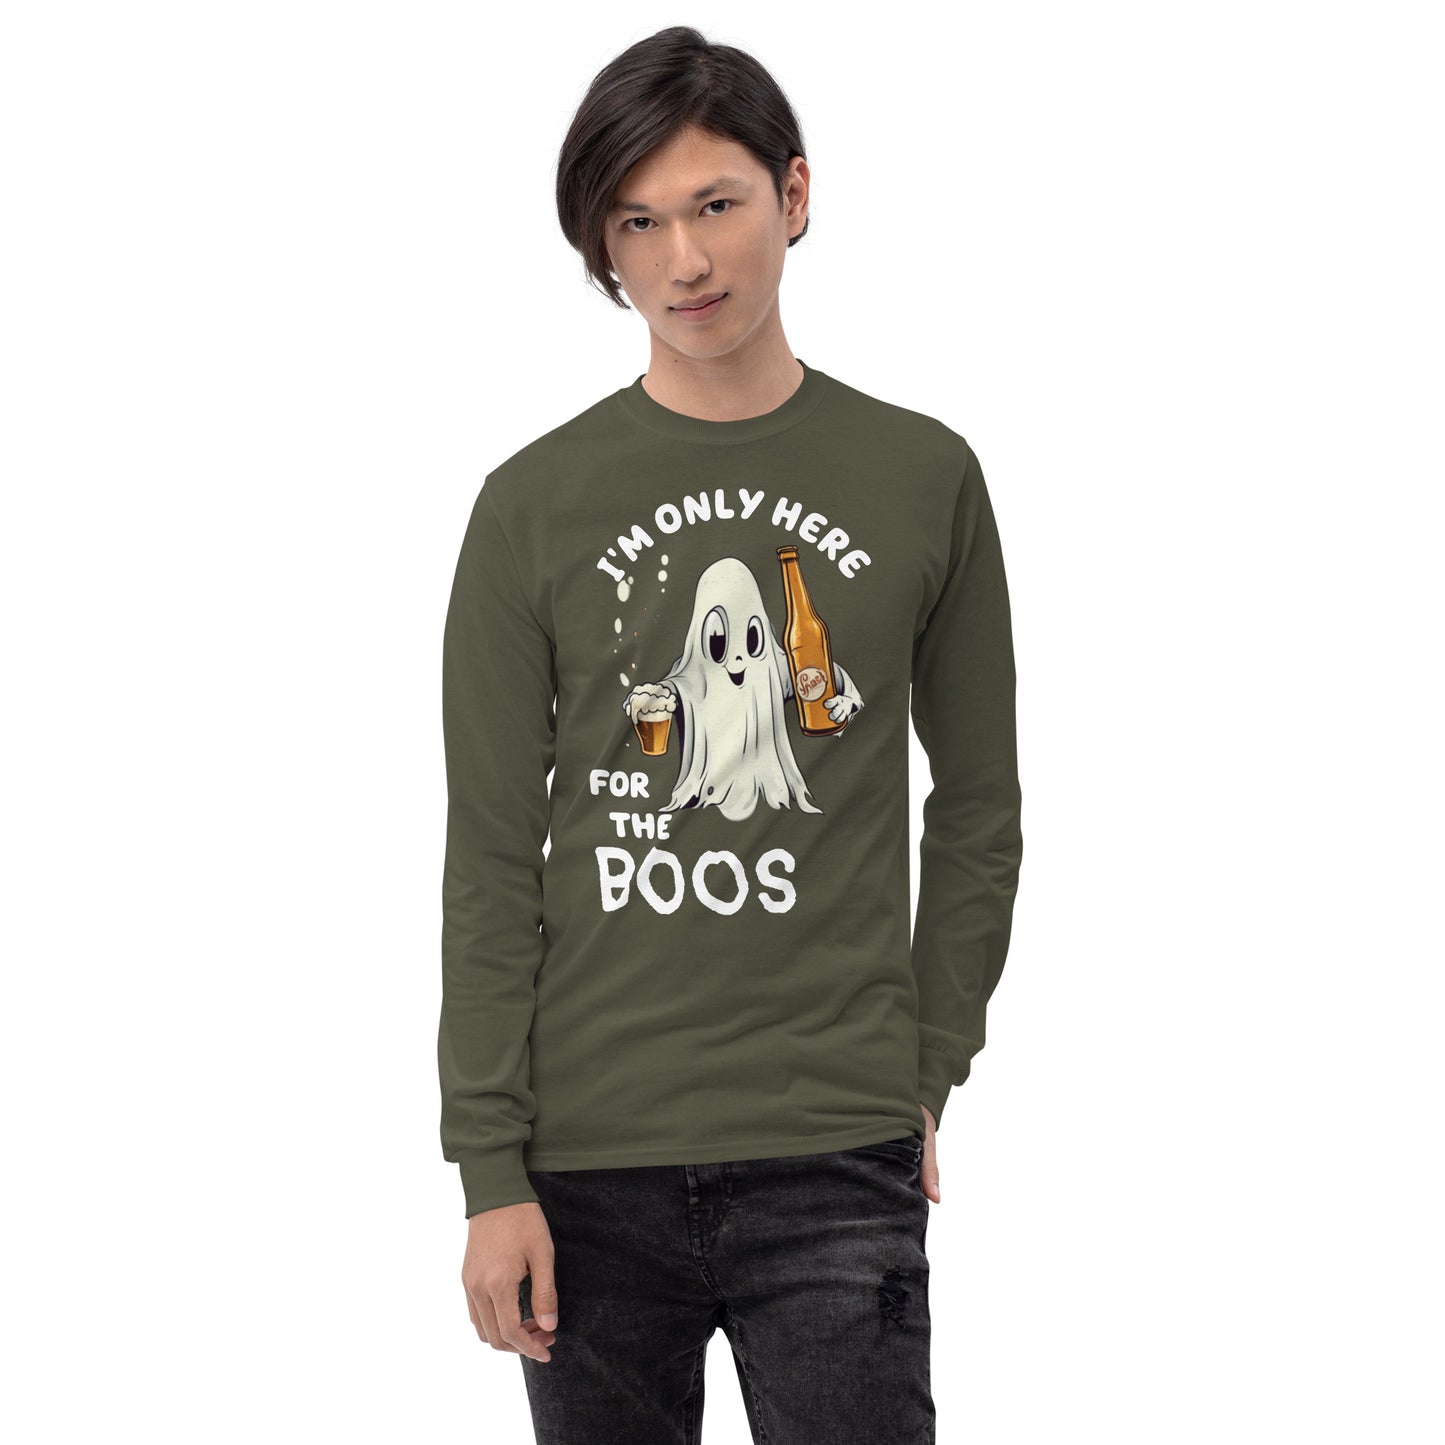 HERE FOR THE BOOS Long Sleeve Shirt